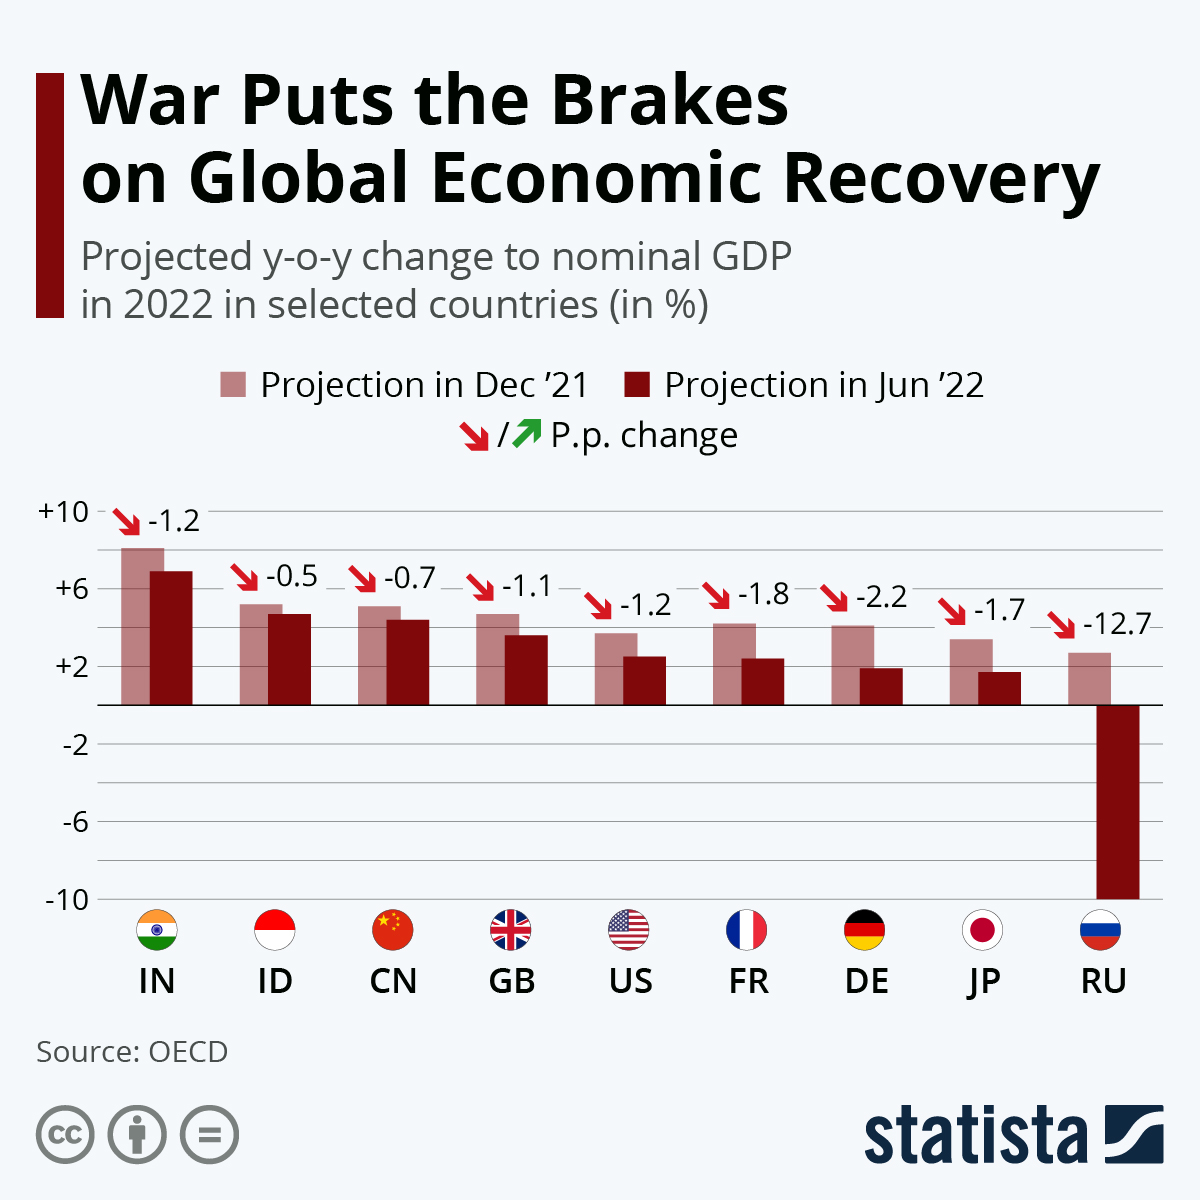 War Puts the Brakes on Global Economic Recovery